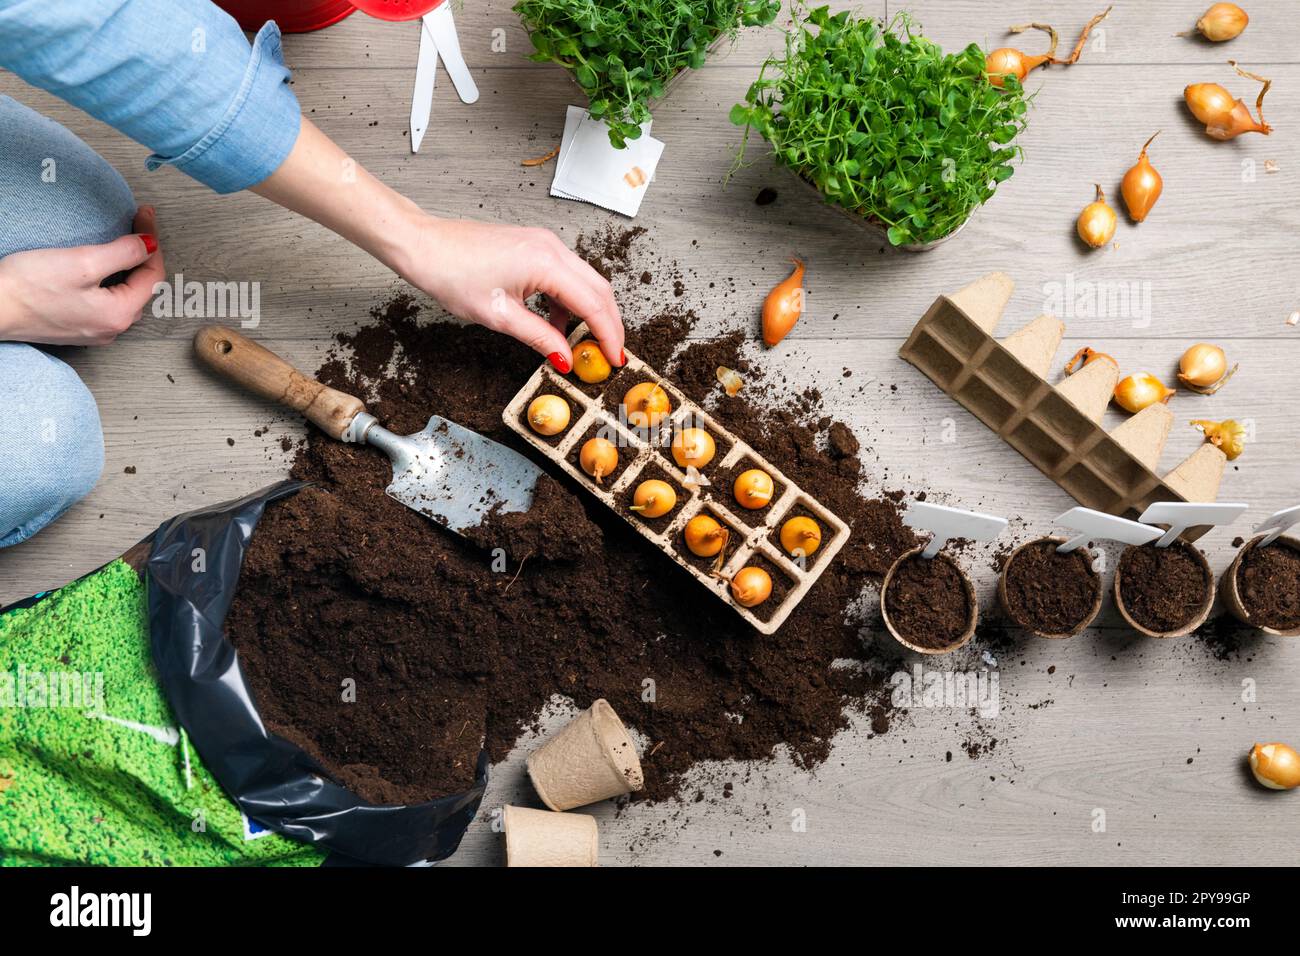 Women planting seeds at home in fertile black earth. Putting name tags for plants. In background freshly grown sprouts. Spring and gardening concept. Stock Photo